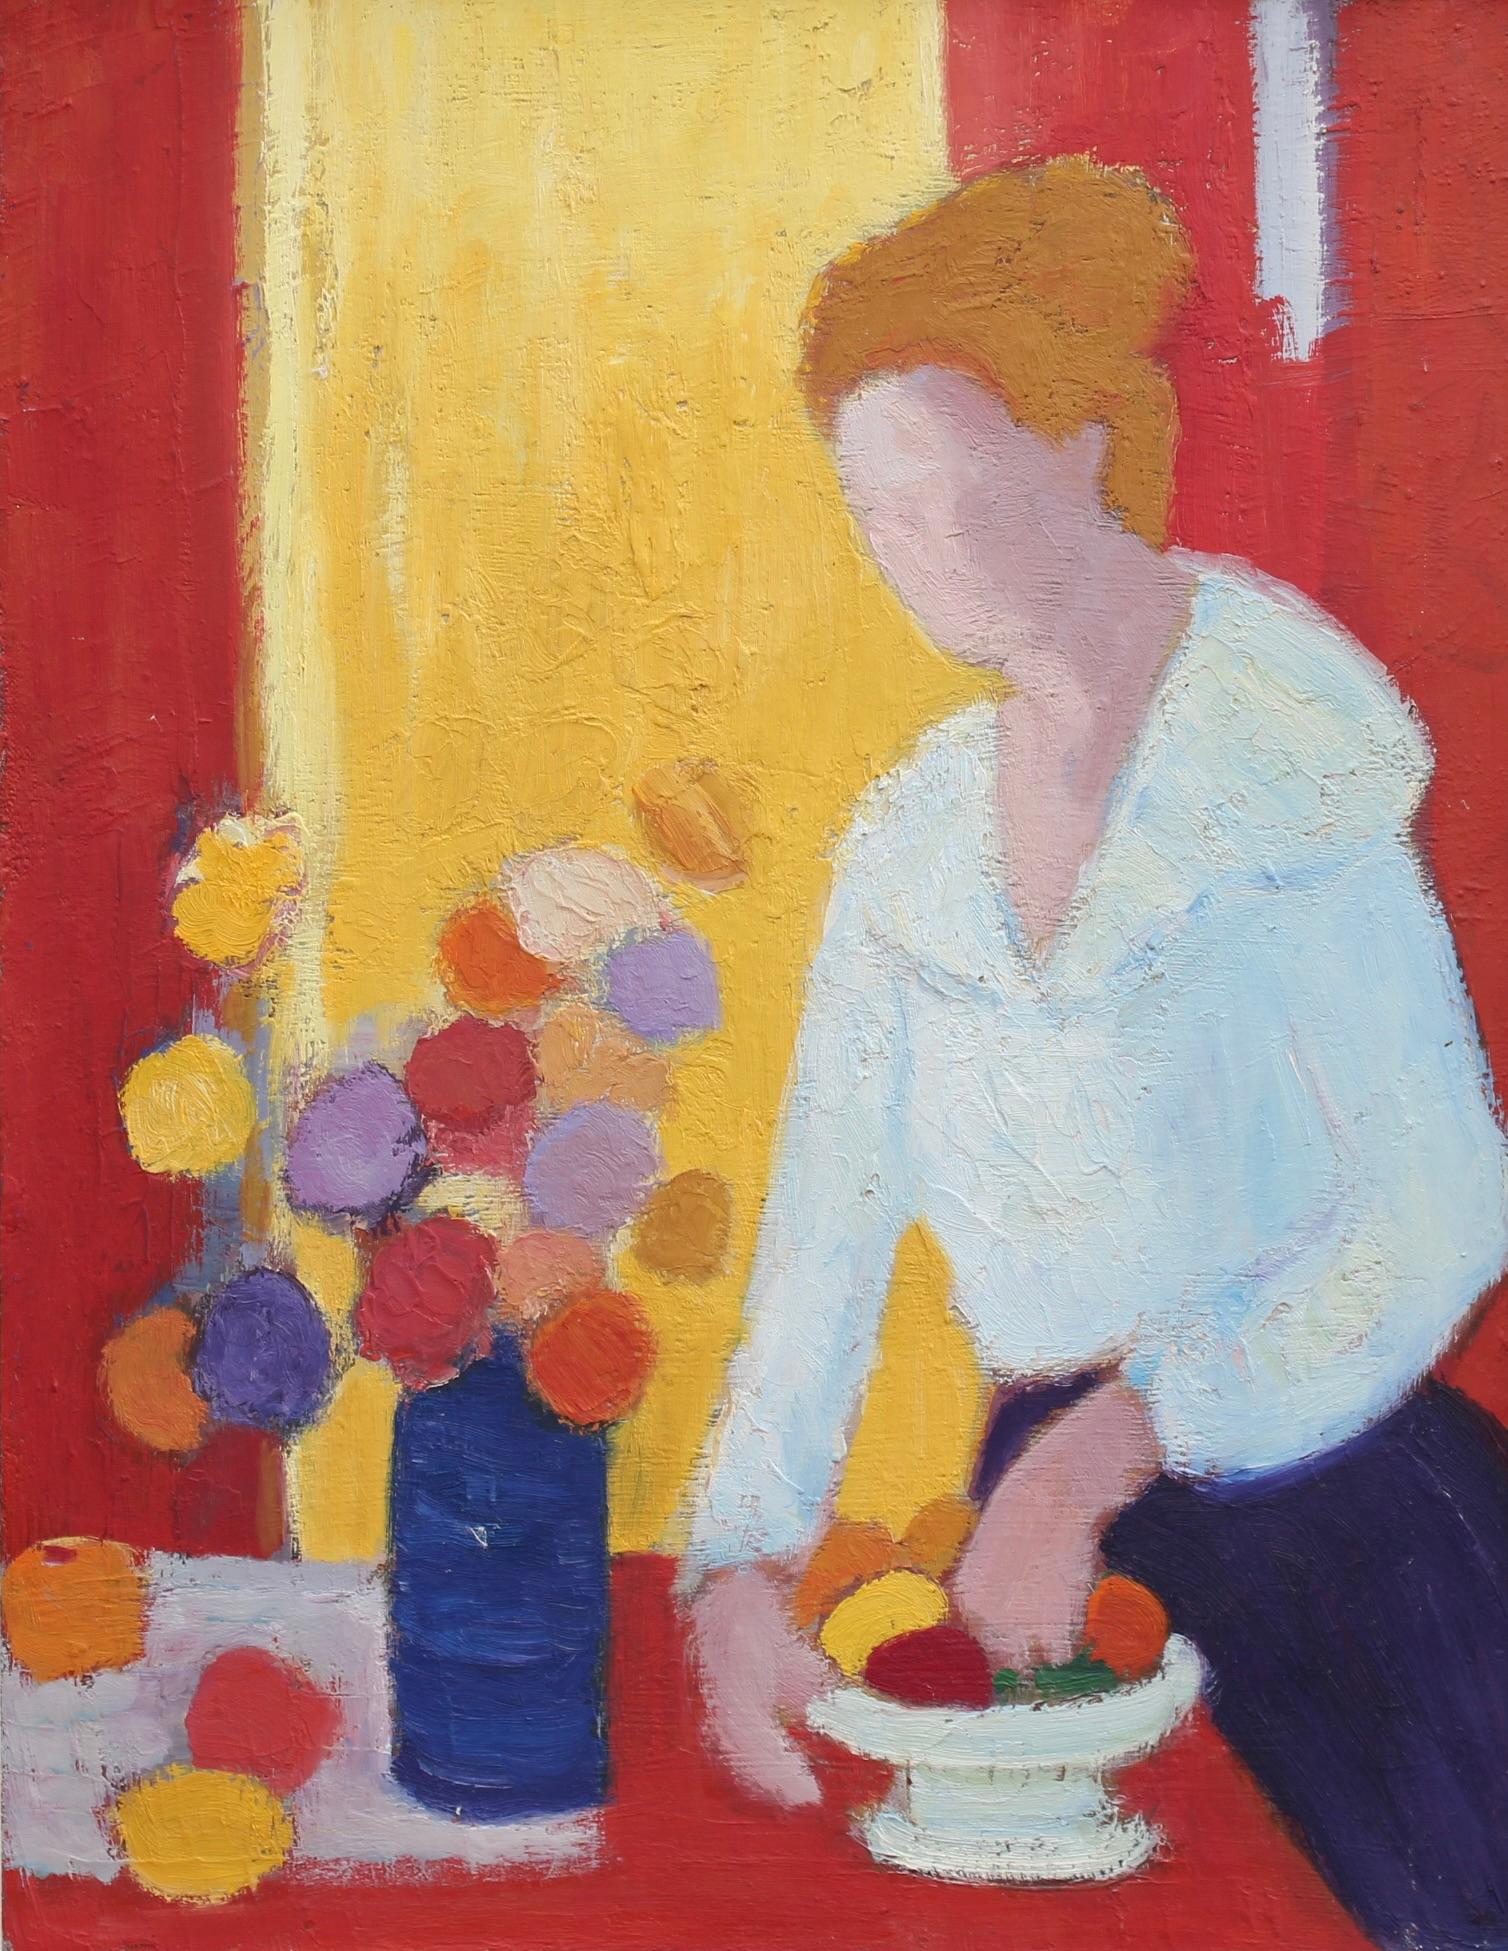 Portrait of a Woman with Flowers and Fruit - Painting by Anna Costa